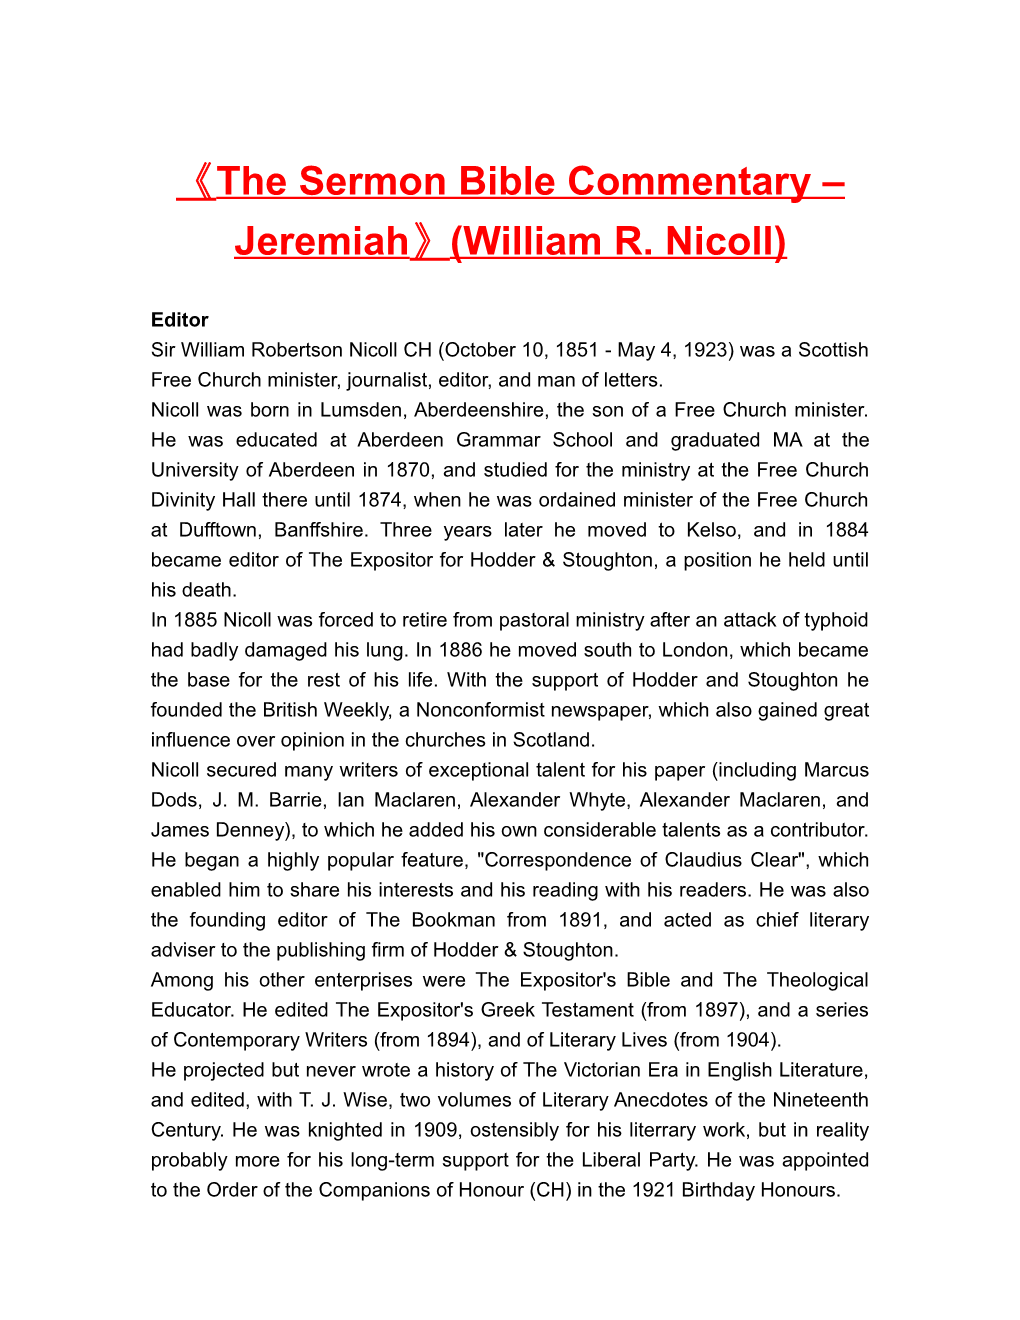 The Sermon Bible Commentary Jeremiah (William R. Nicoll)